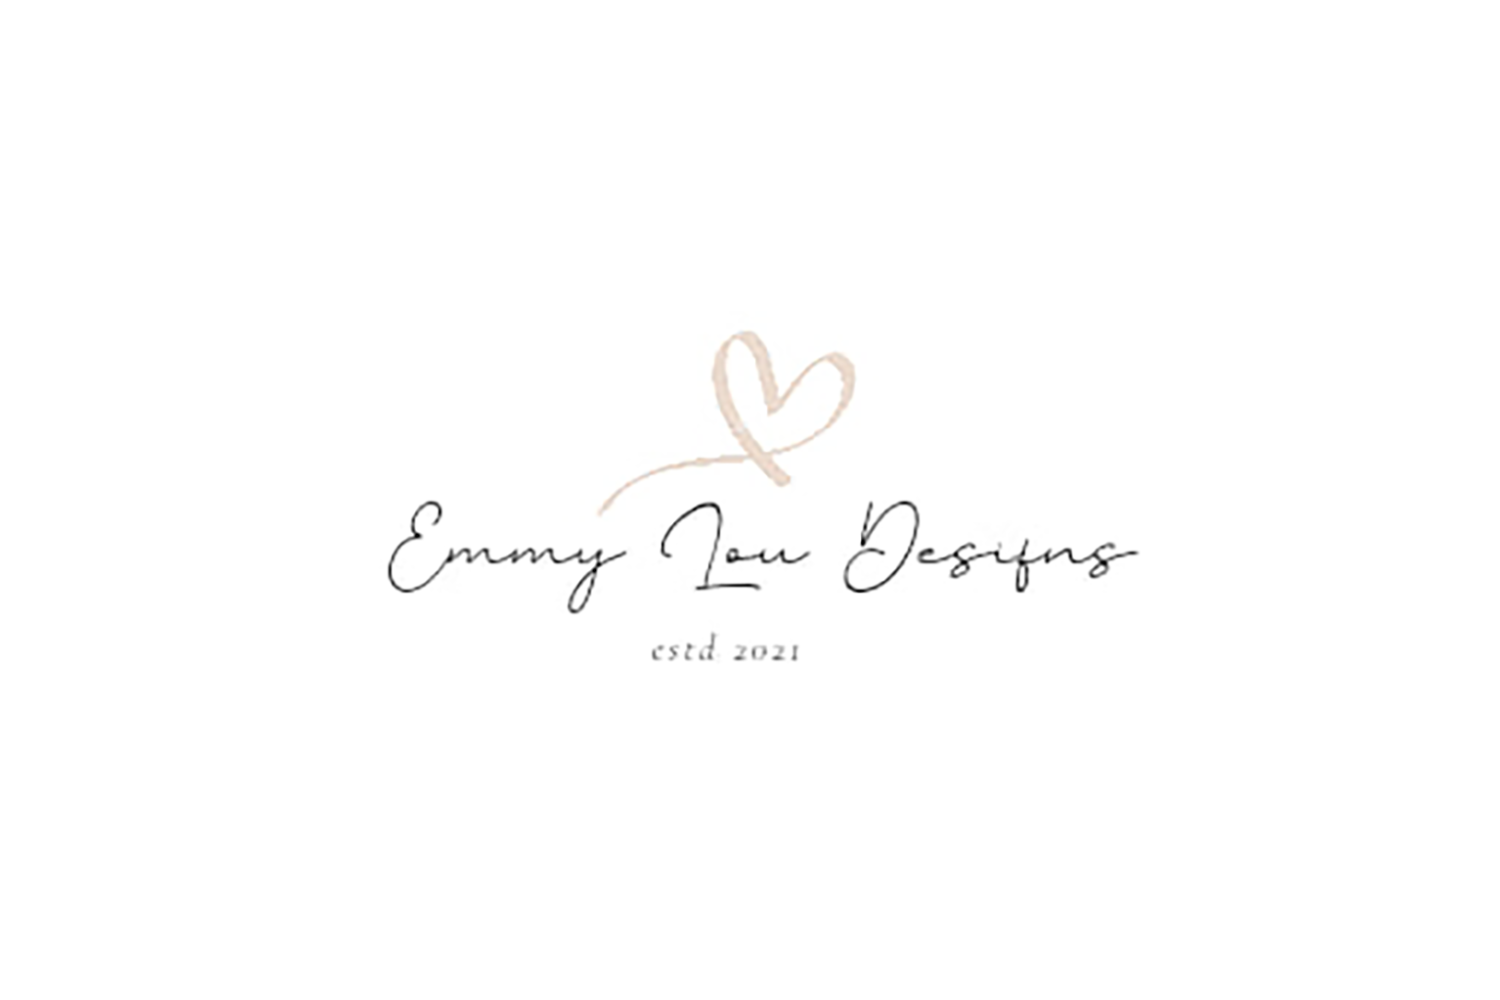 The official logo of Emmy Lou Designs in New Cumberland, West Virginia.